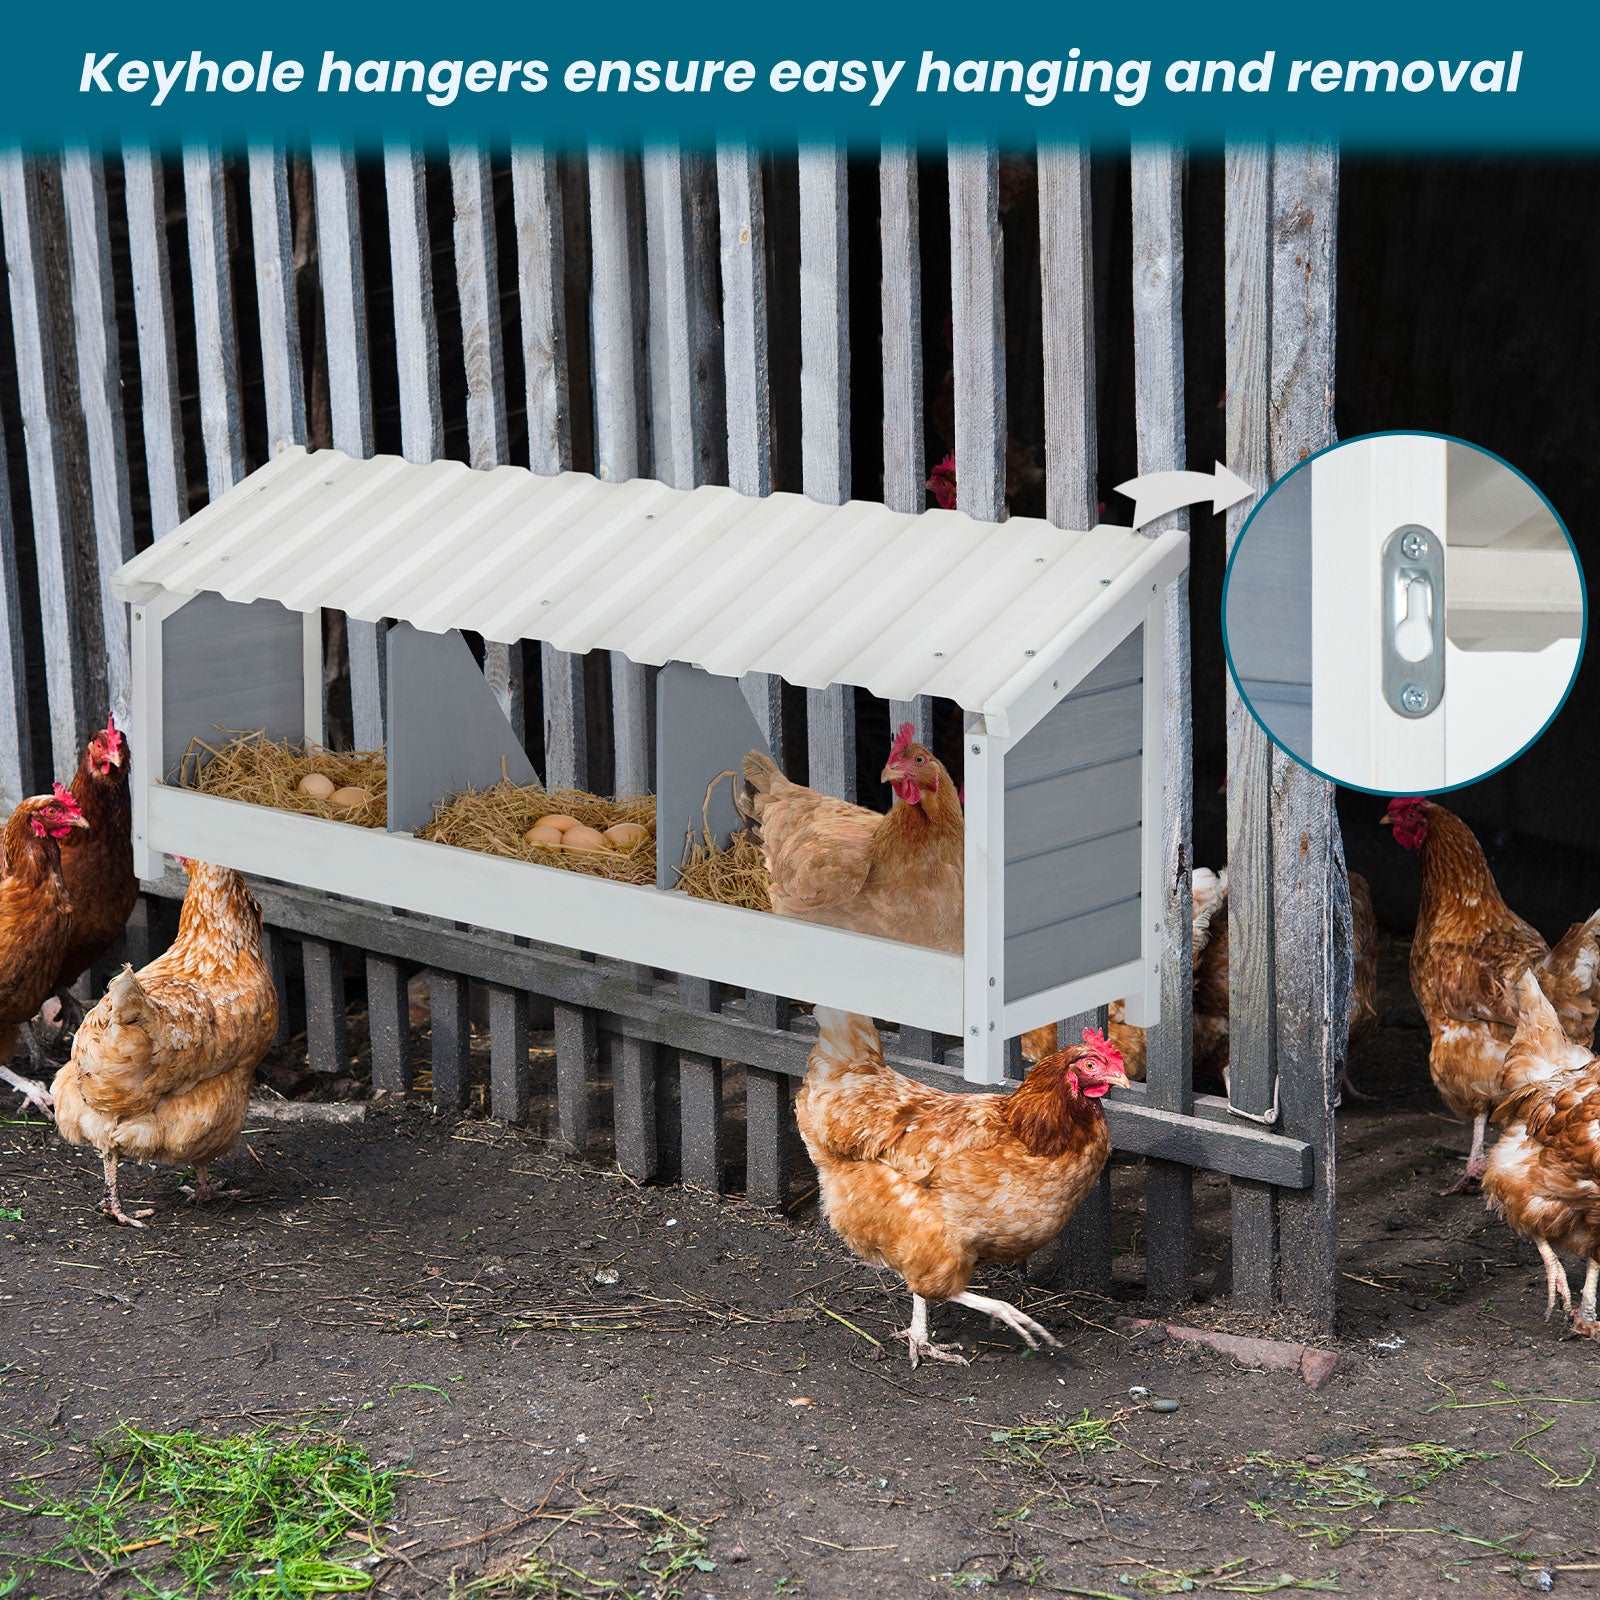 petsfit-triple-chicken-nesting-box-chicken-coop-accessories-with-pvc-roofing-versatile-use-wood-nesting-boxes-for-hens-easy-to-assemble-06